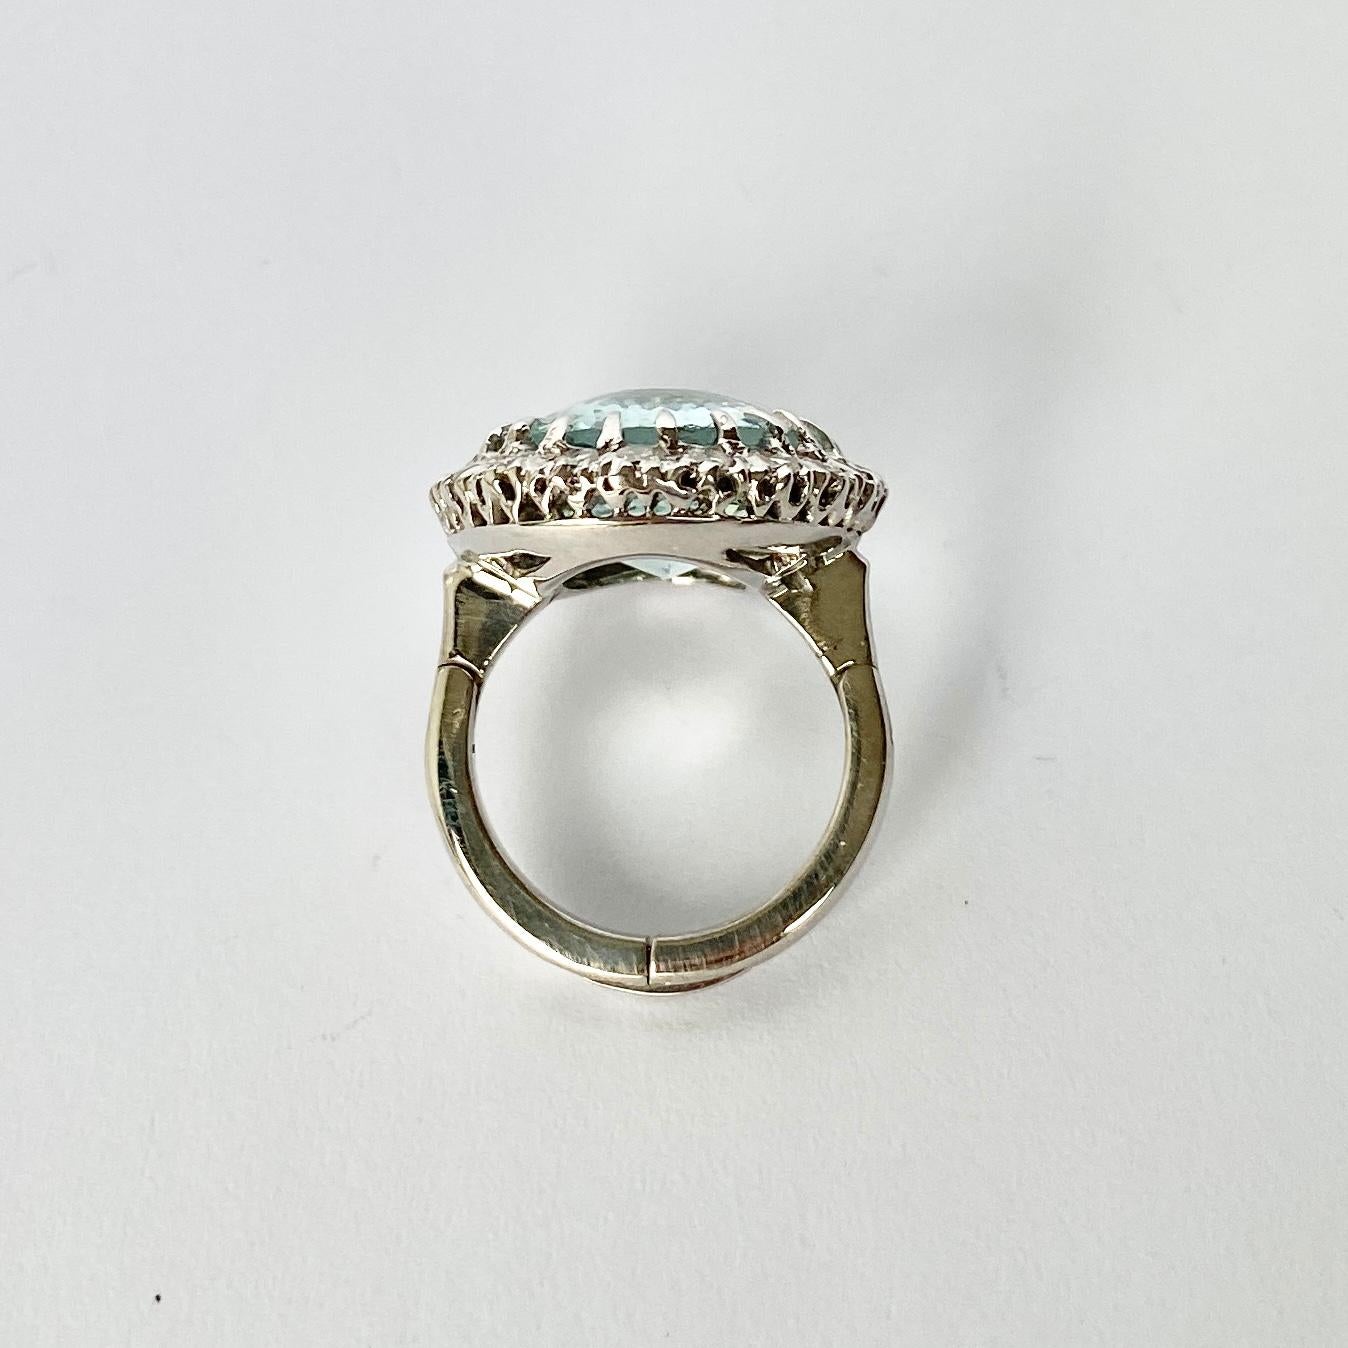 Sitting proud at the centre of this wonderful cluster ring is a sparkling aqua stone measuring approx 9carat. Around the aqua stone sits a halo of smaller diamonds totalling 1carat. The band does have an opening arthritic band but can be replaced